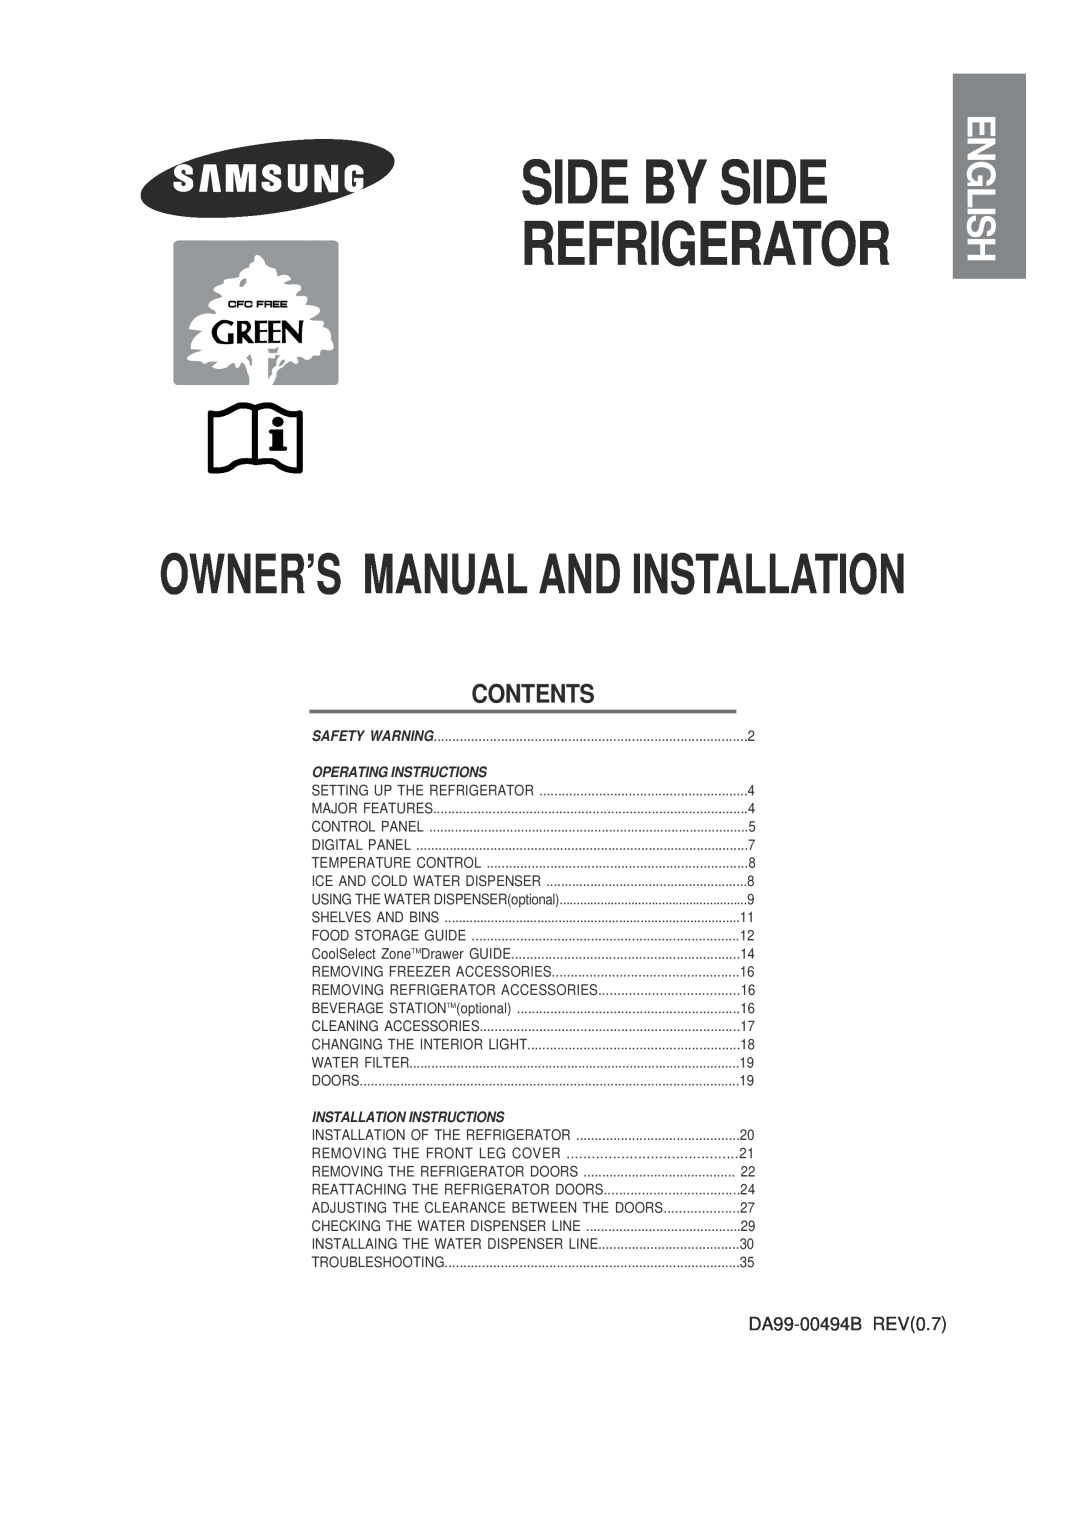 Samsung SRS620DW owner manual English, Contents, Side By Side, Refrigerator, Operating Instructions 